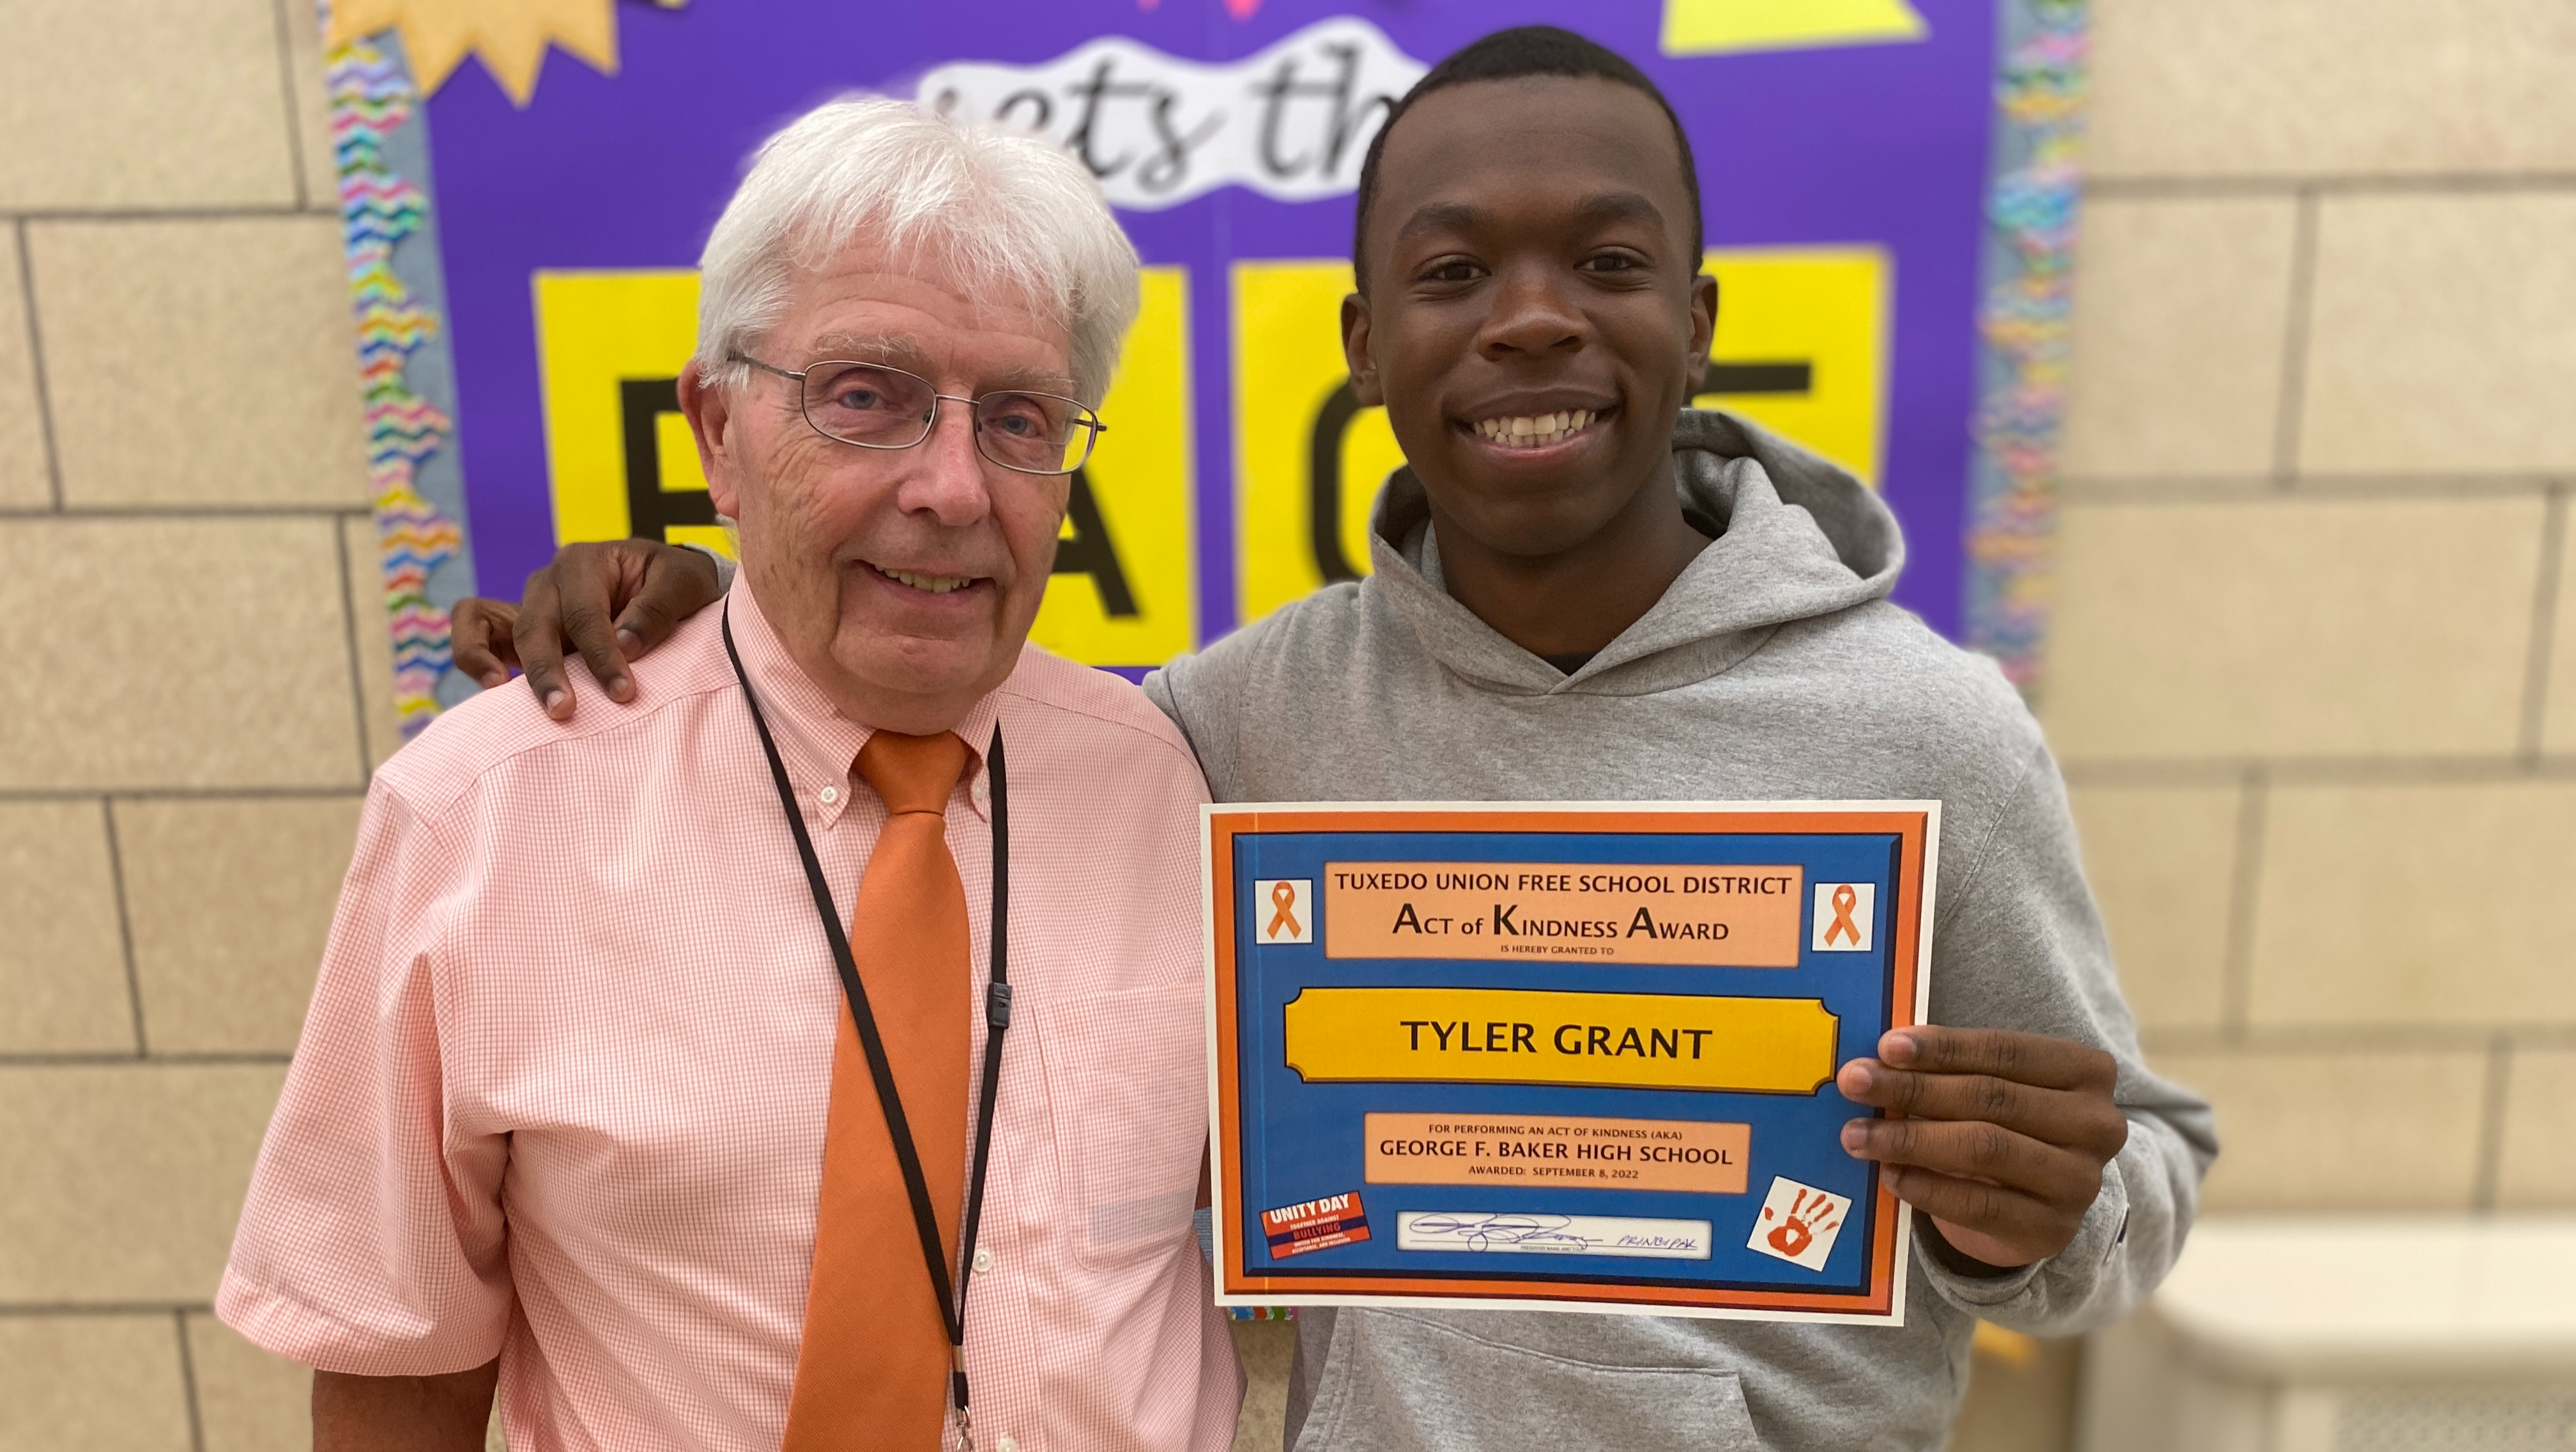 Principal Reese with George F. Baker High School student Tyler Grant